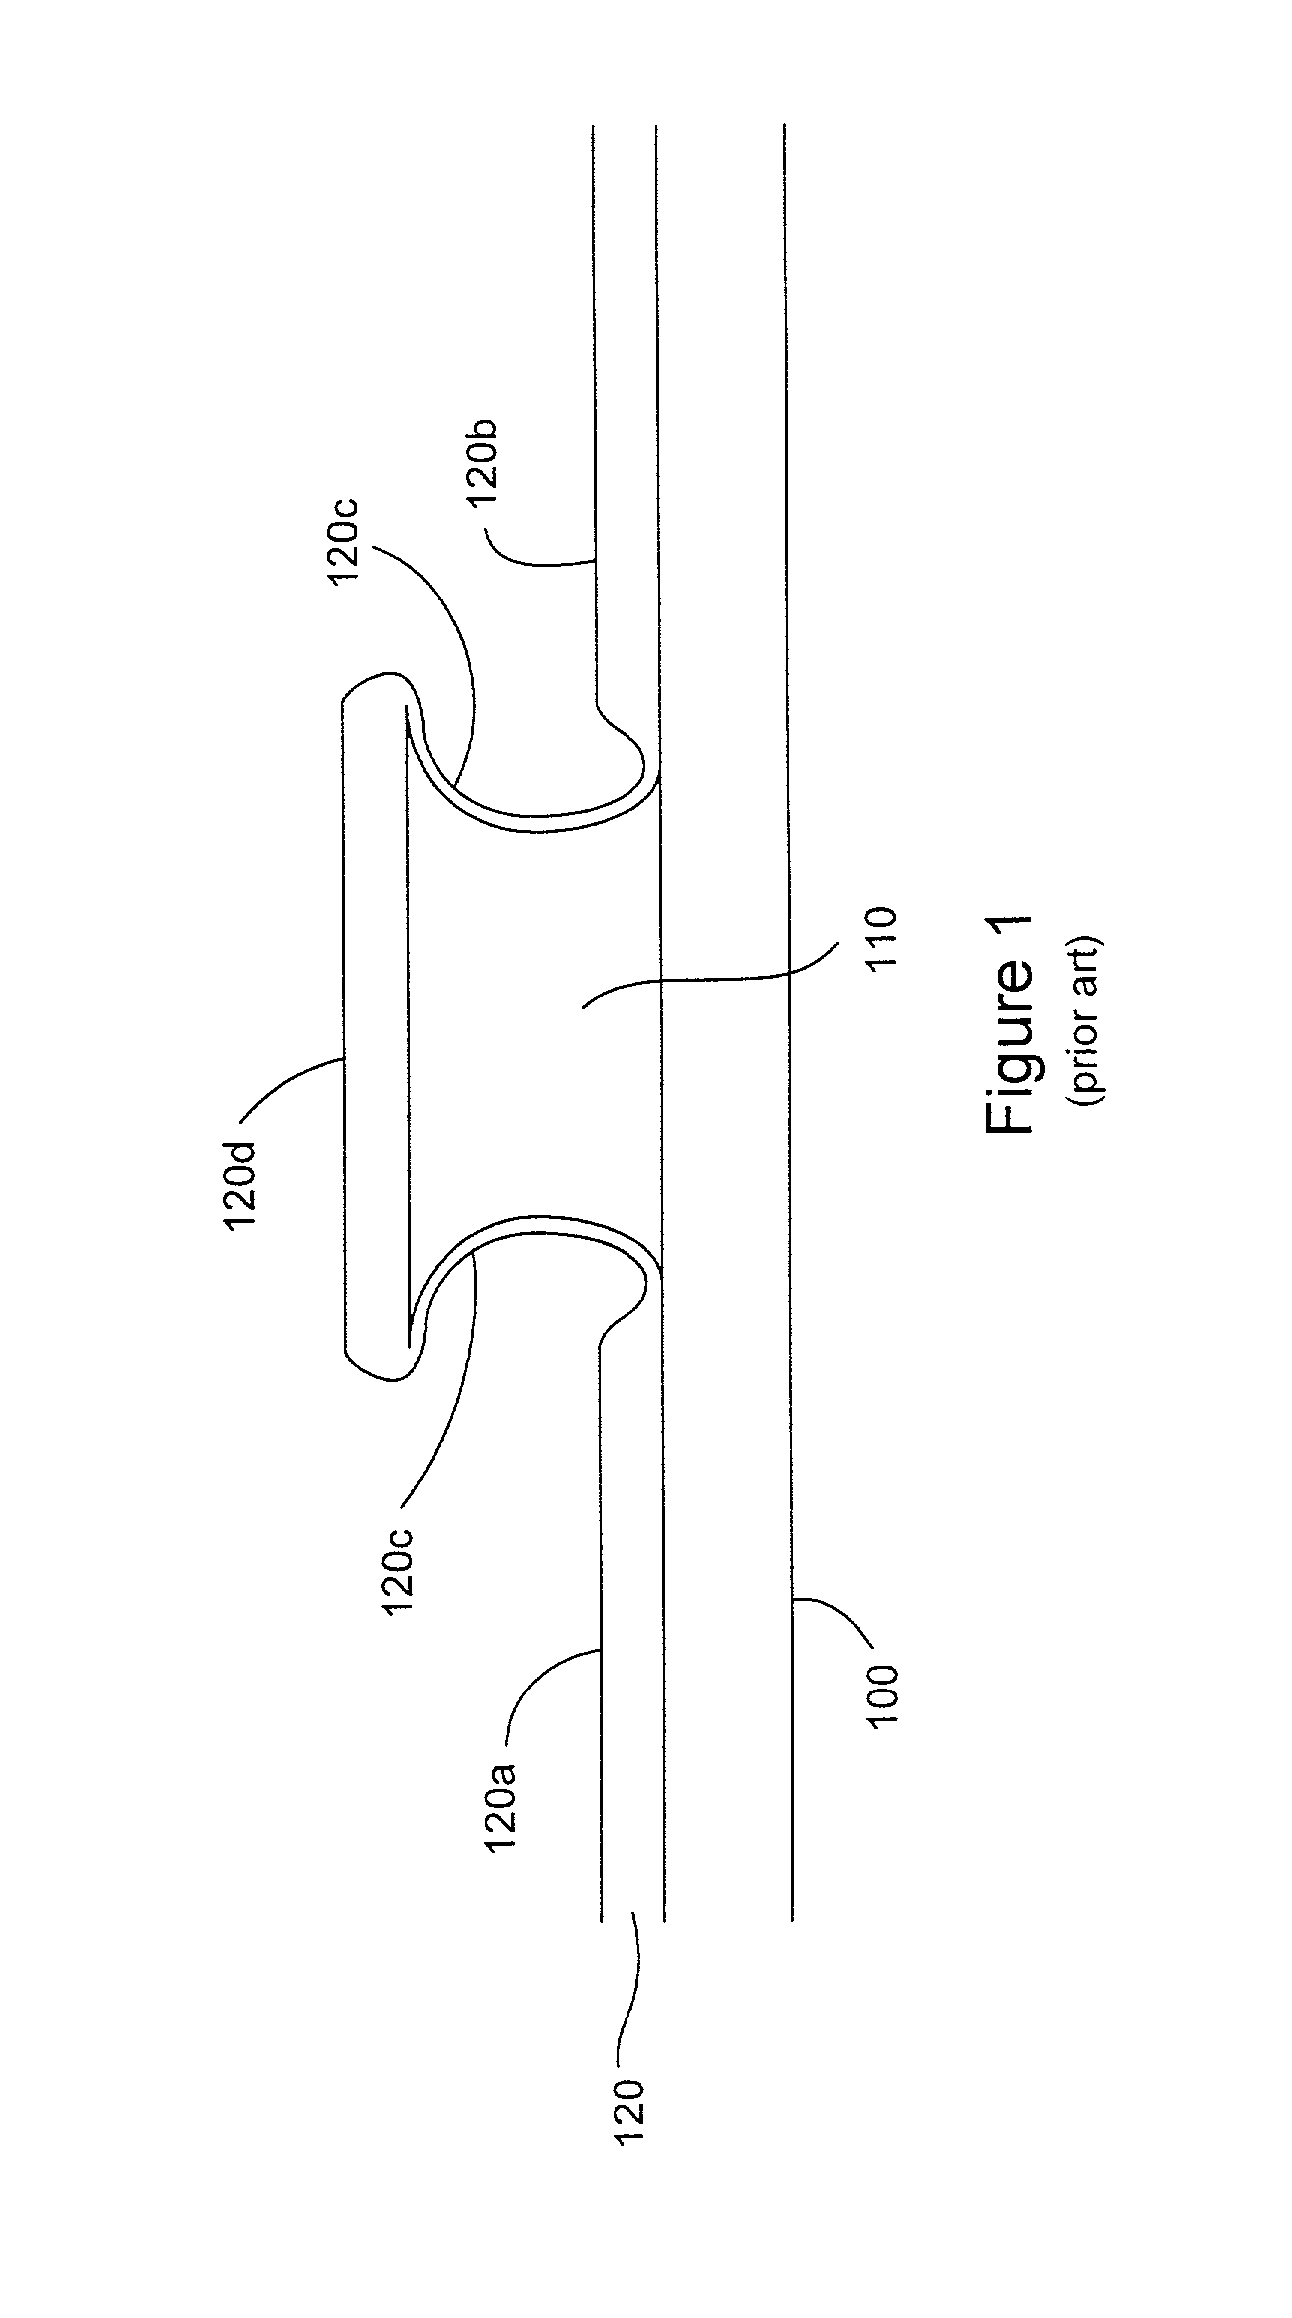 Method for patterning devices